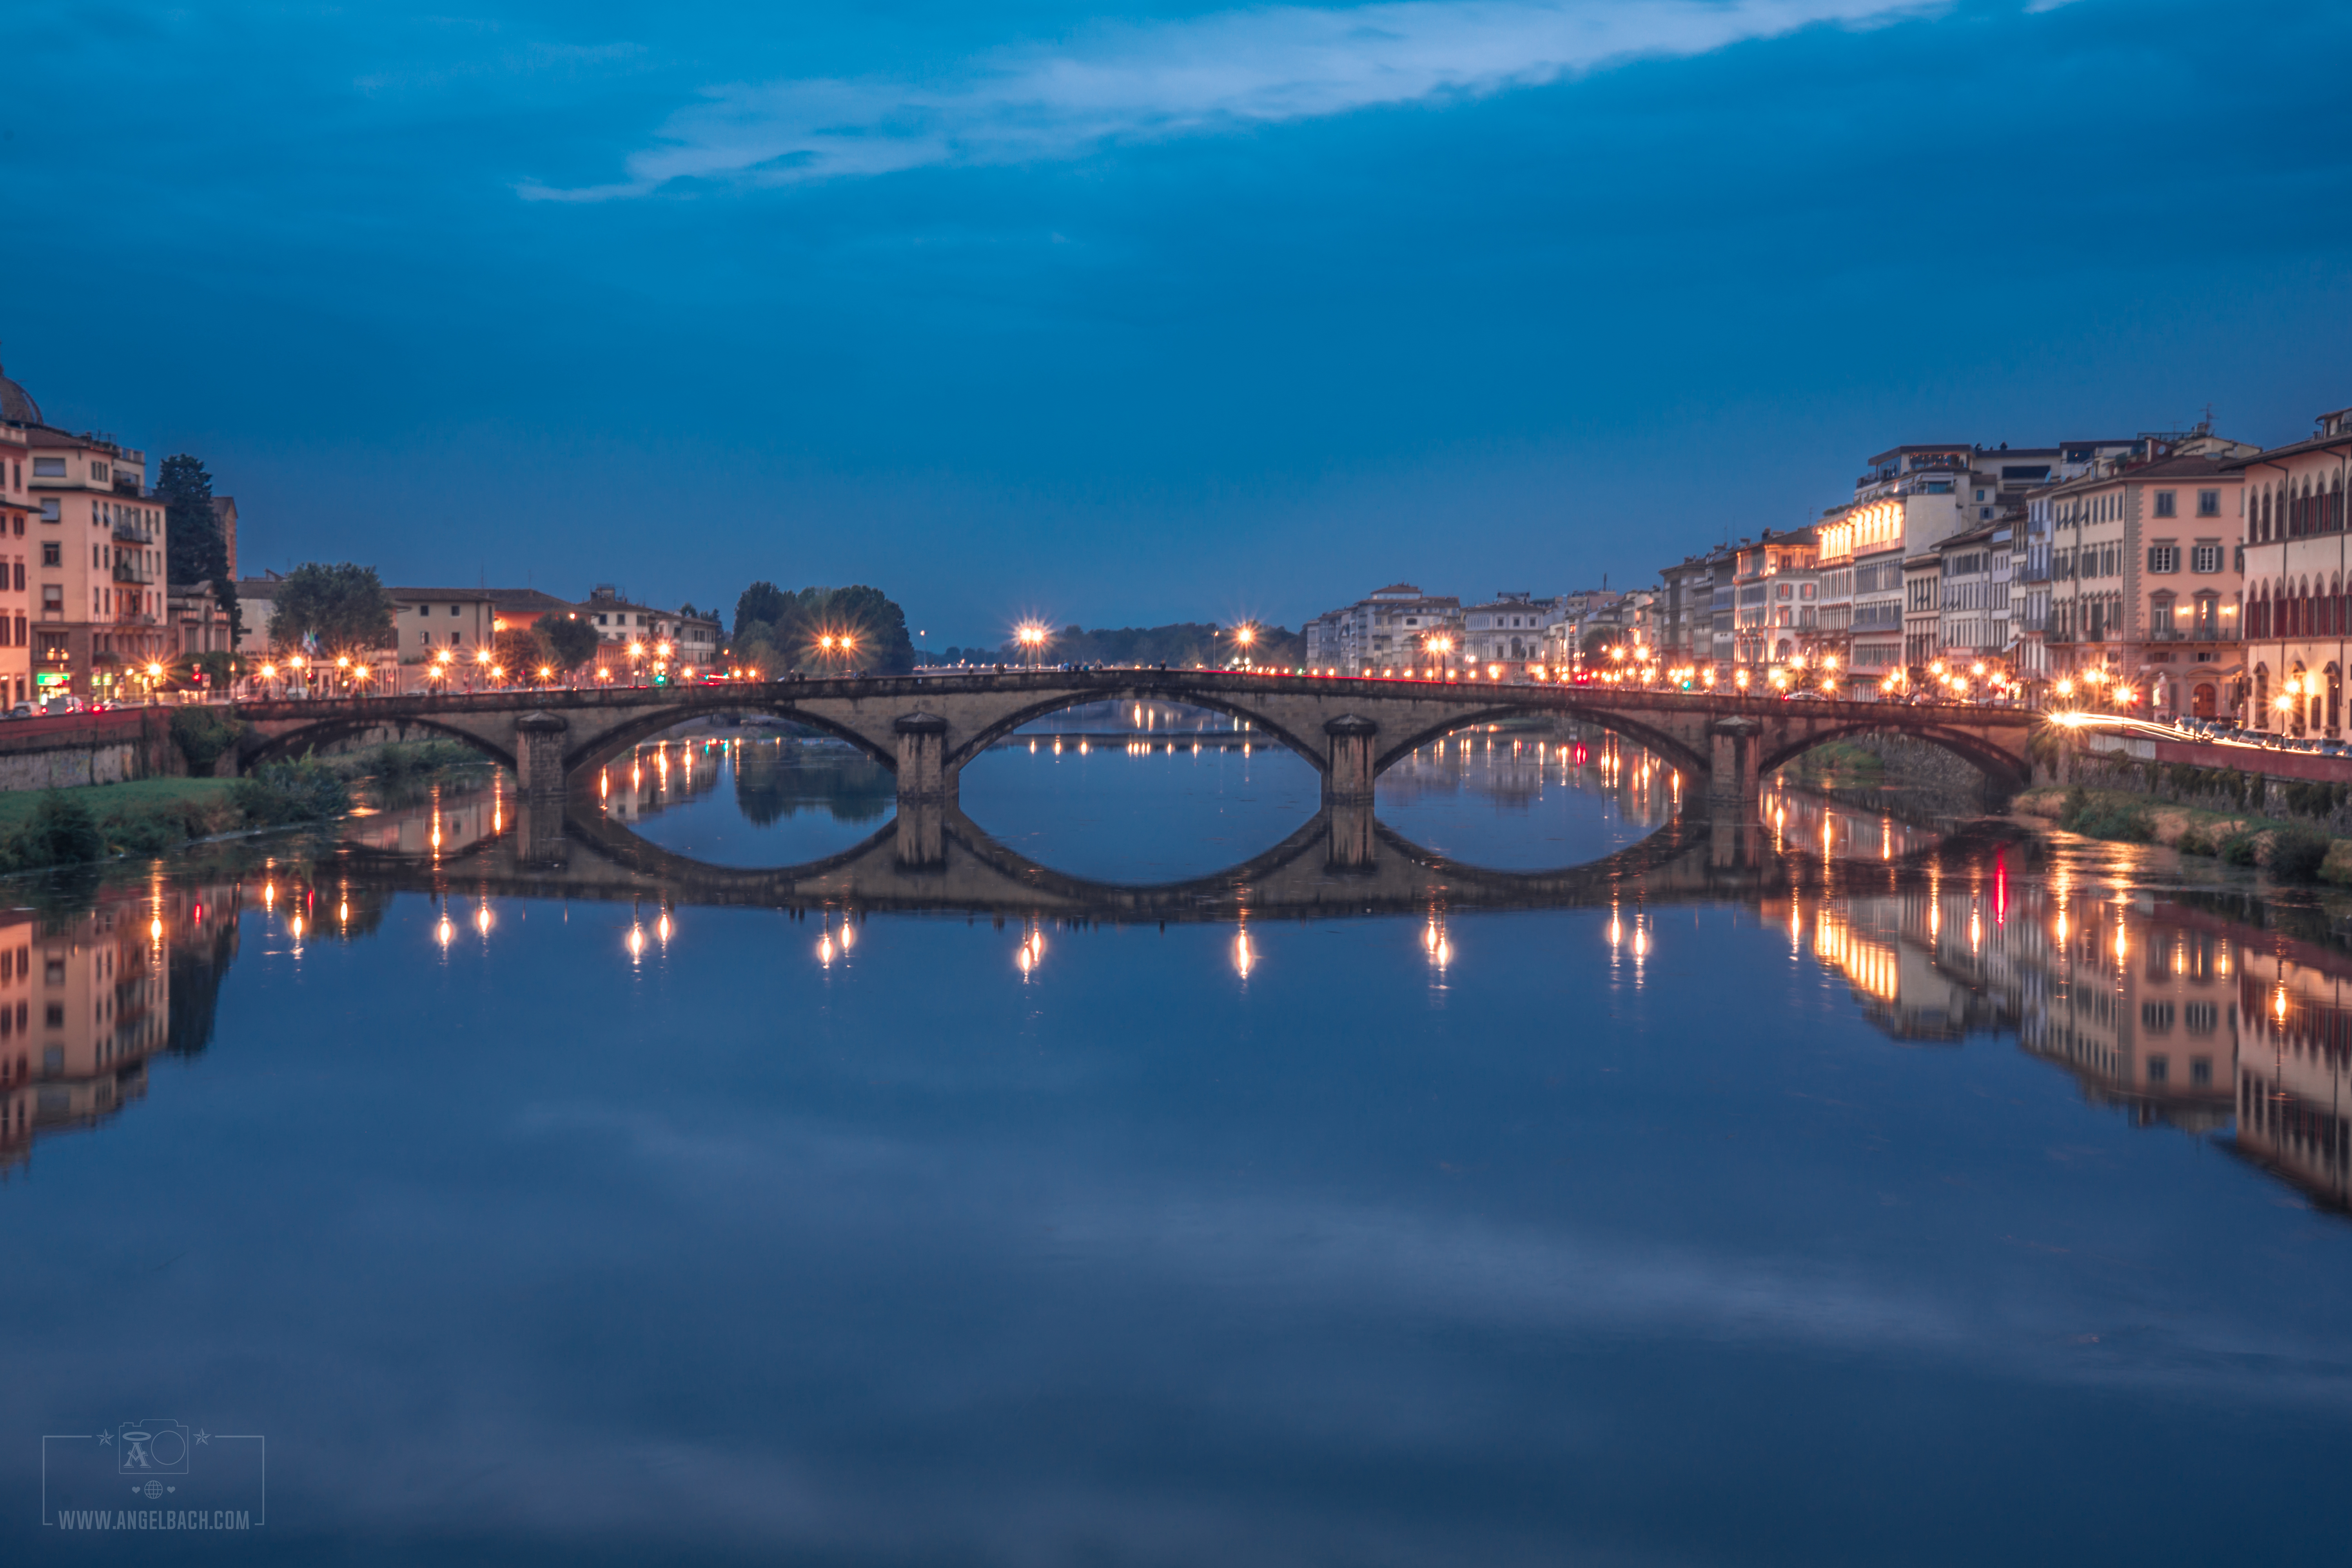 Night Photography, Long Exposure, Cityscape, Landscape,Florence, Bride, River, Tourist Attraction, Lights, Ancient place, Arno River, Tuscany, Ponte Vecchio, Italy